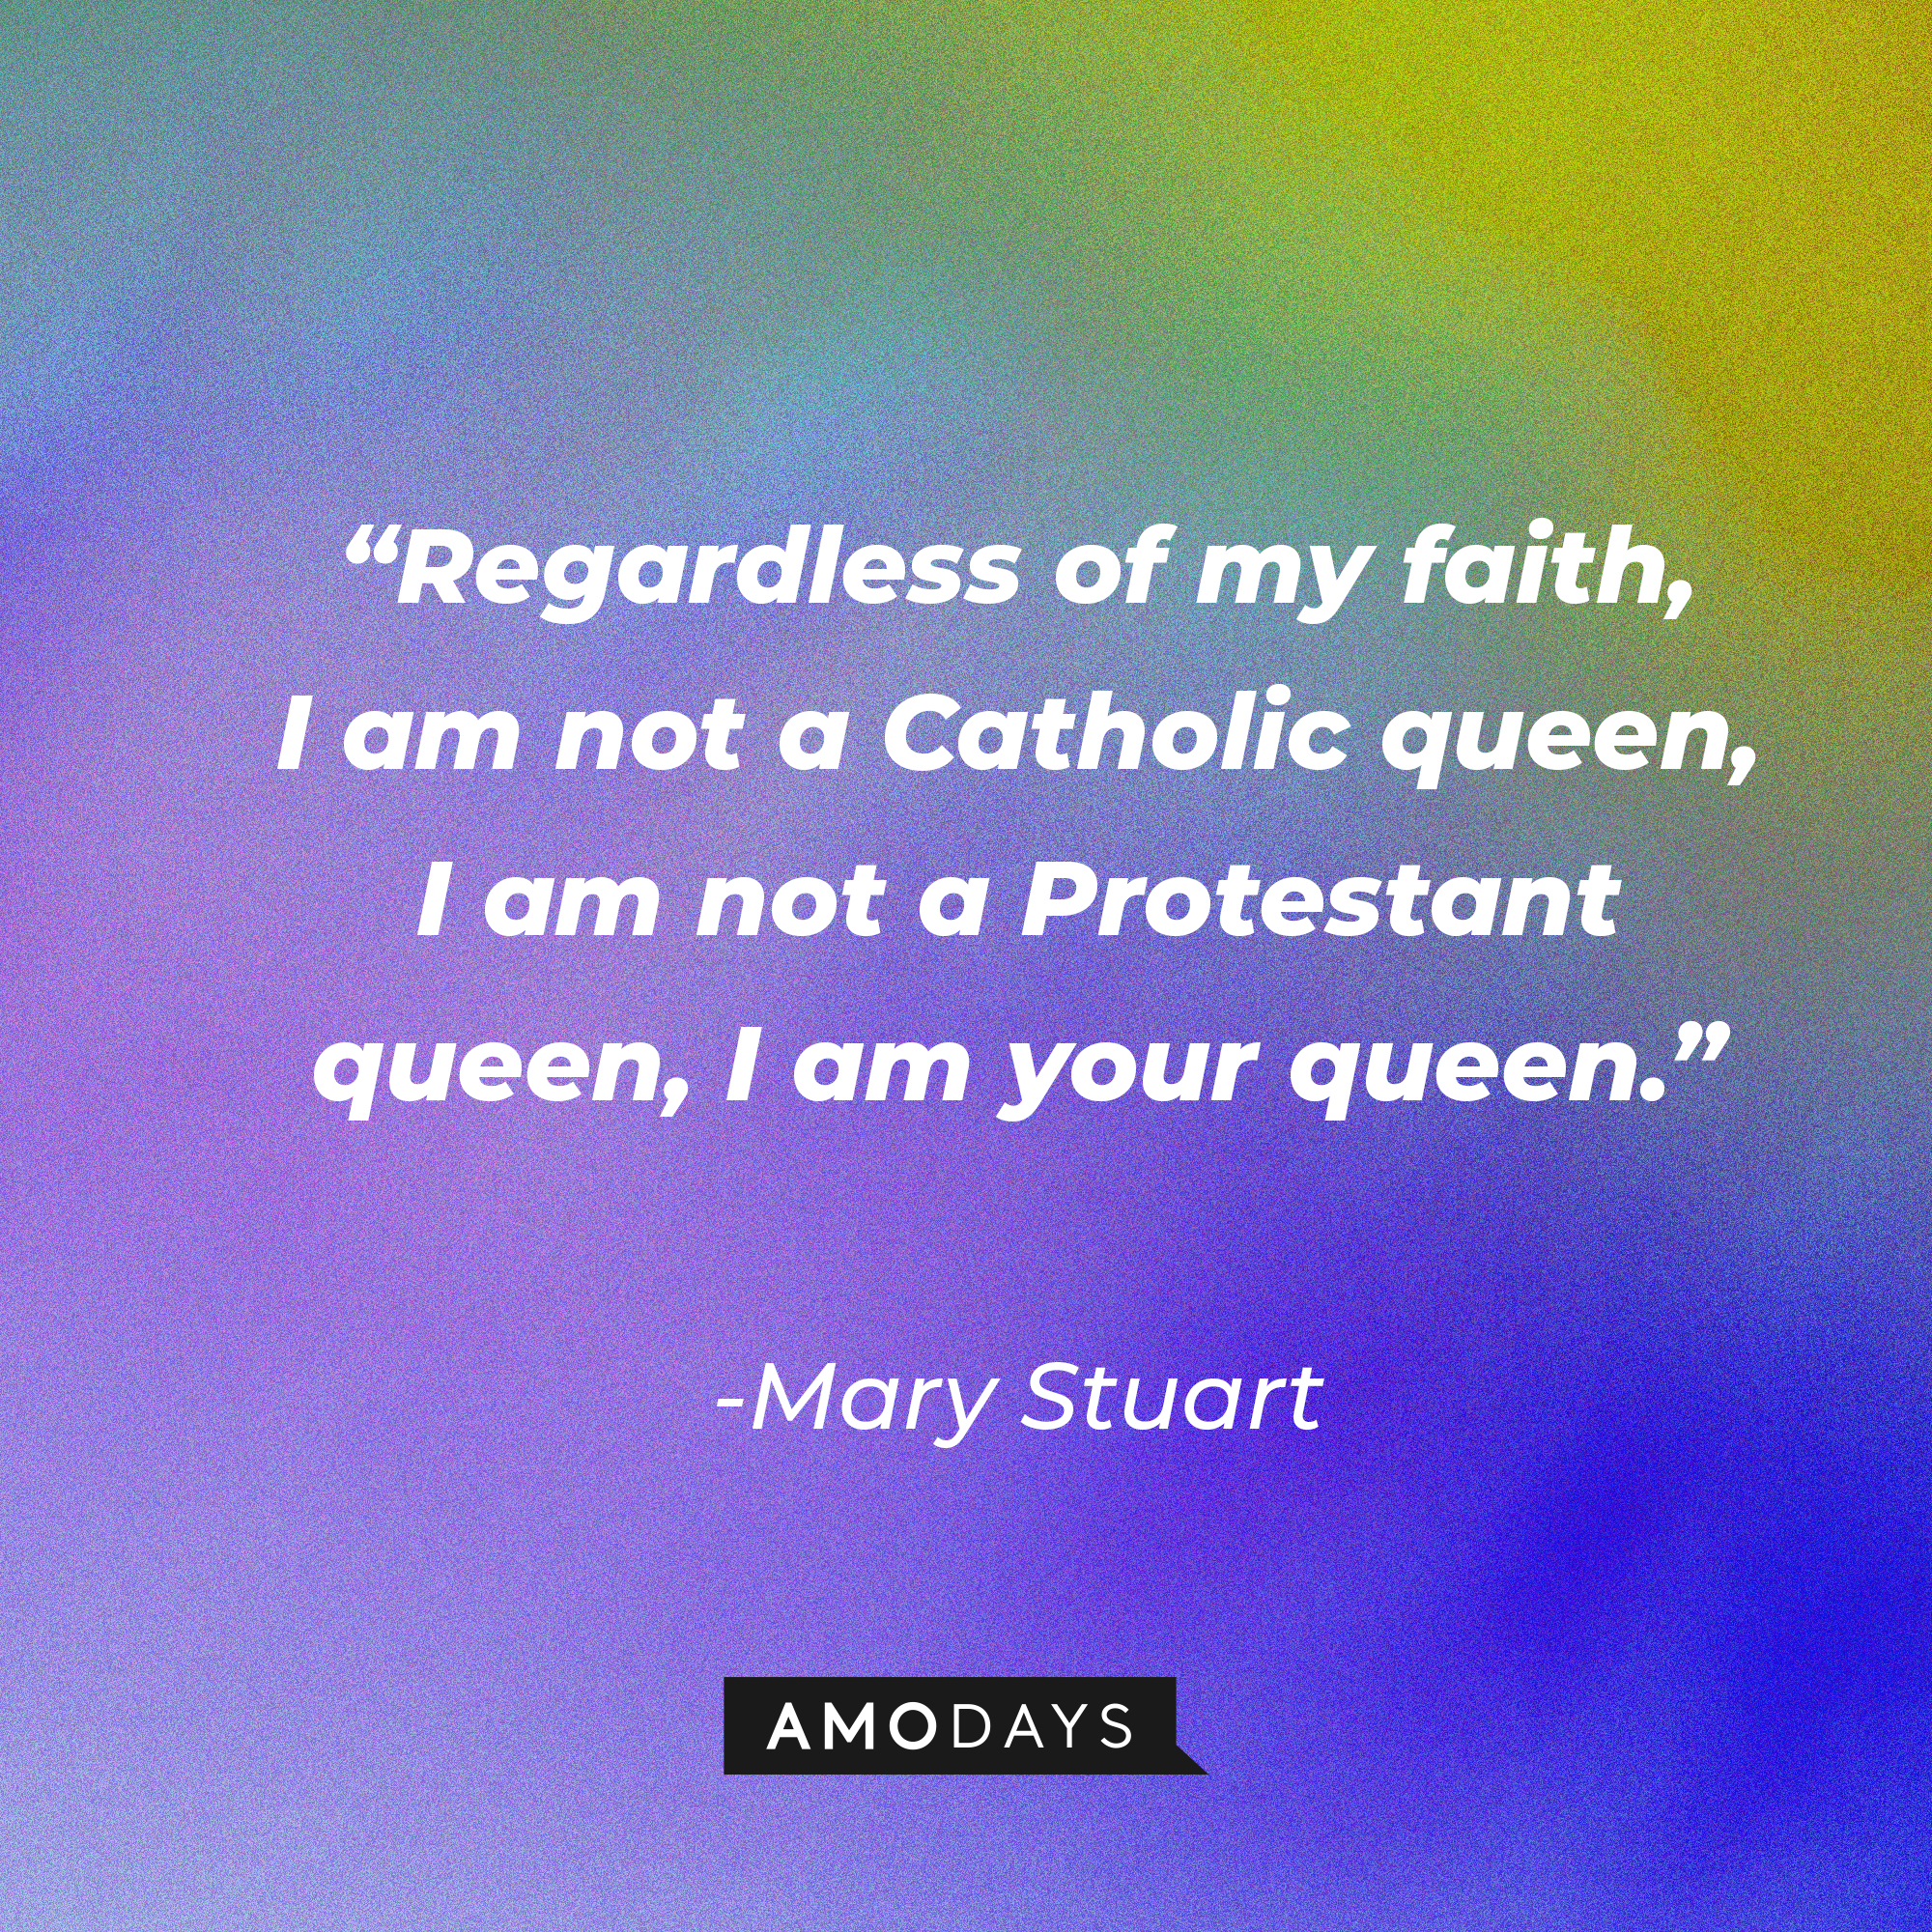 Mary Stuart's quote in "Reign:" “Regardless of my faith, I am not a Catholic queen, I am not a Protestant queen, I am your queen.” | Source: Amodays